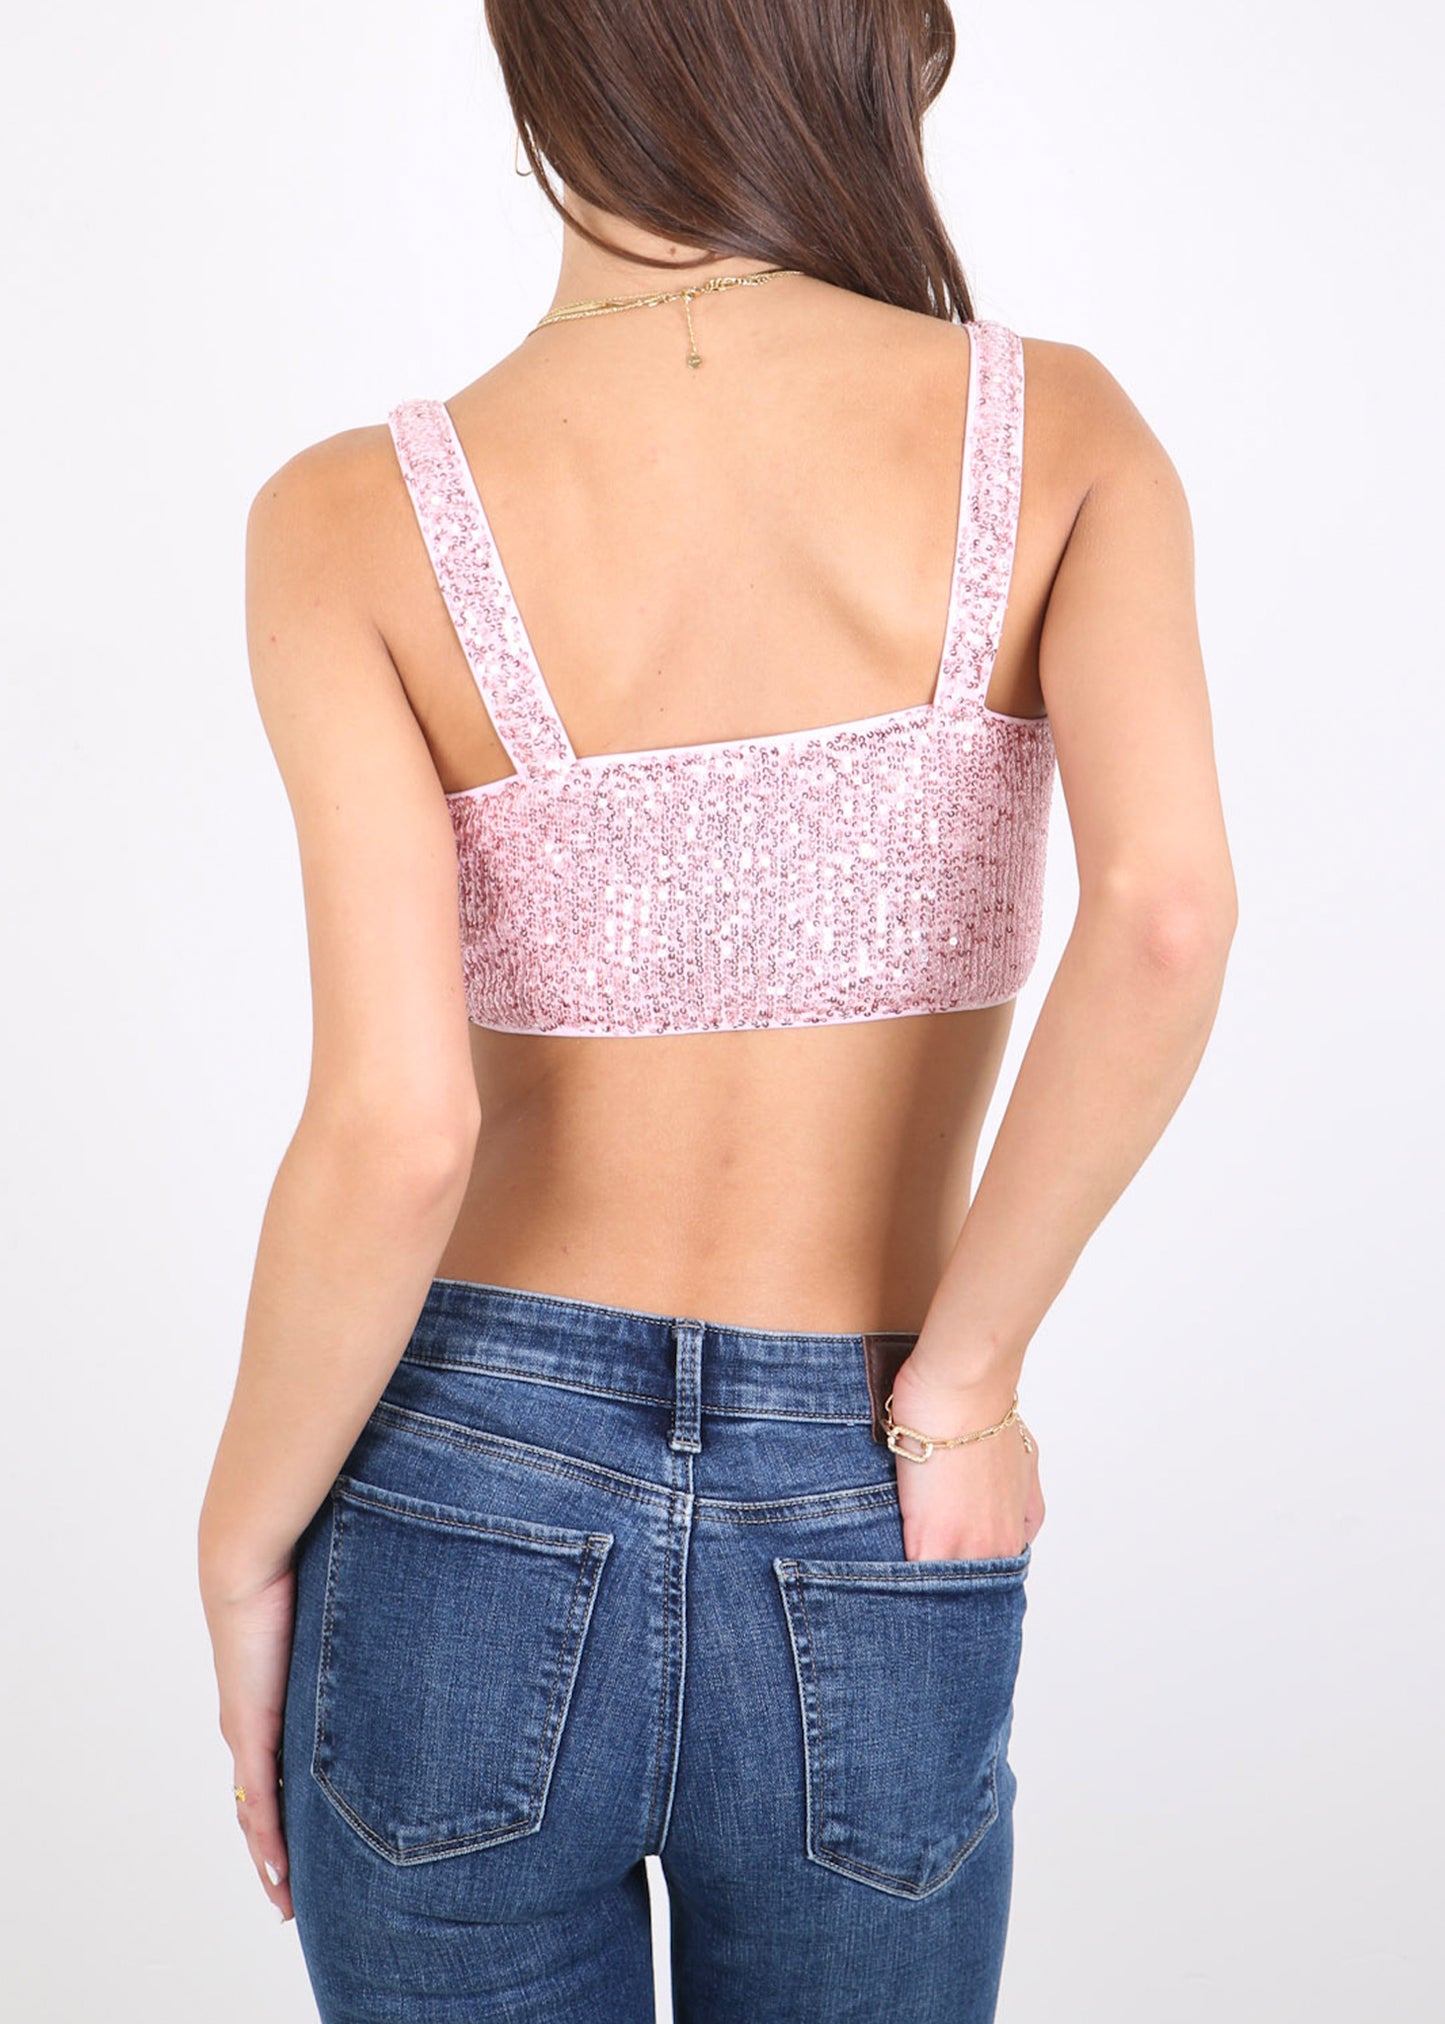 Anna-Kaci Women Stretchy Sequins Fashion Crop Top Square Neck Wide Strap Sparkling Party Tube Tops